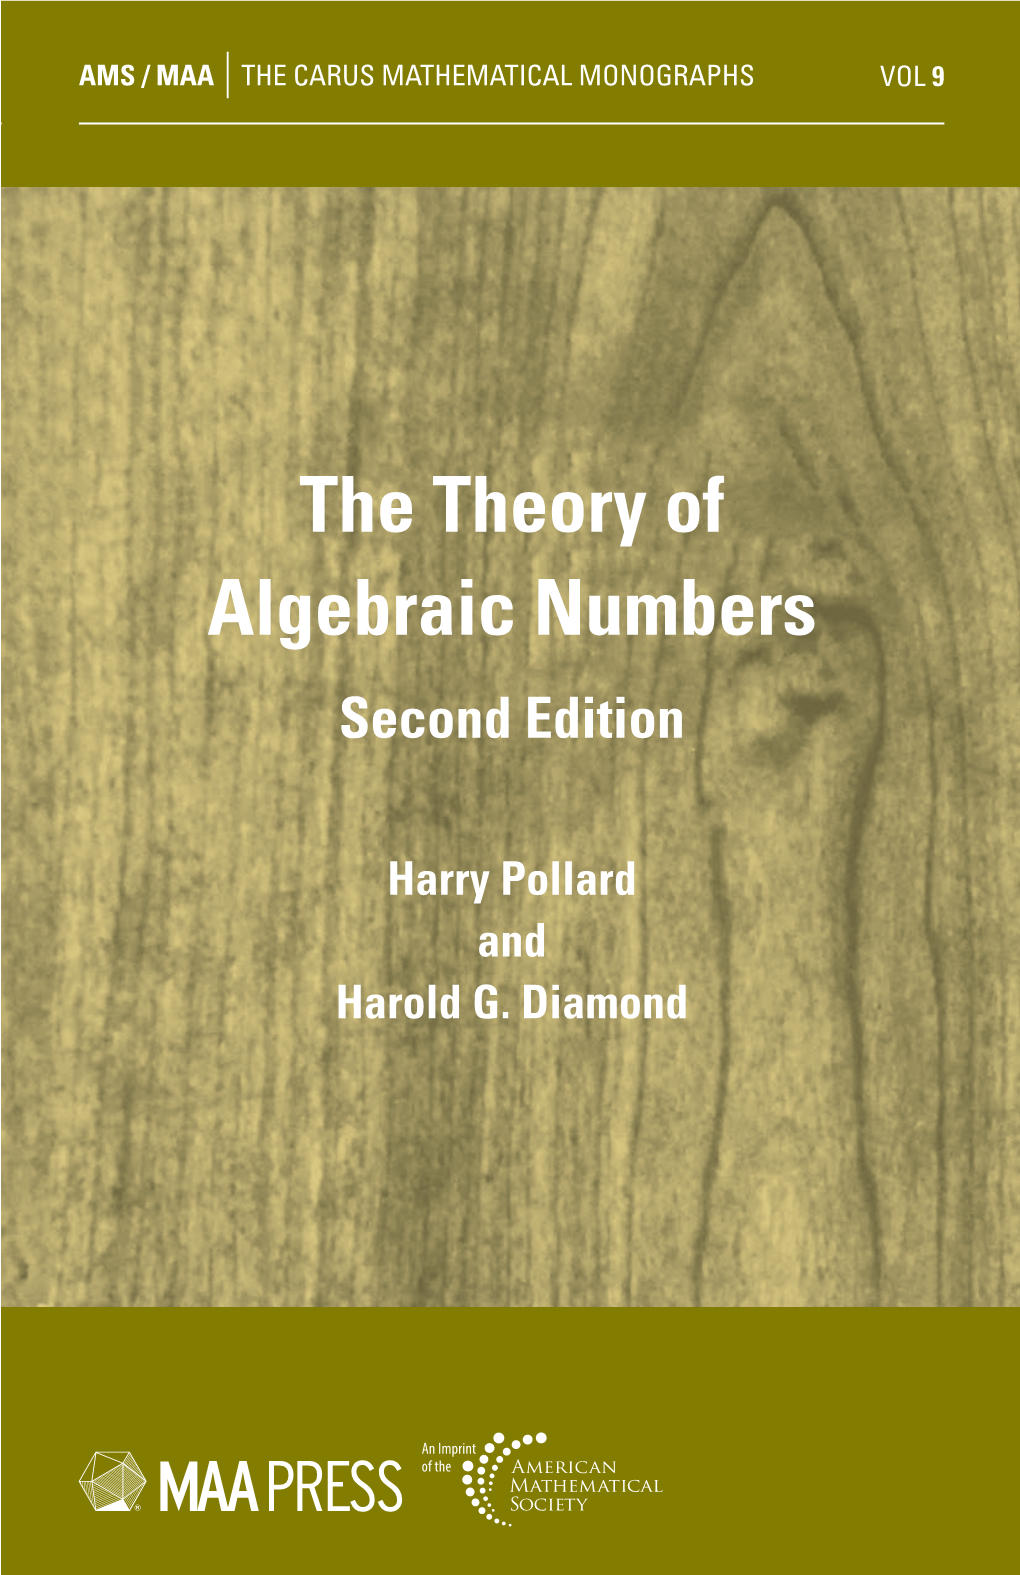 The Theory of Algebraic Numbers Second Edition